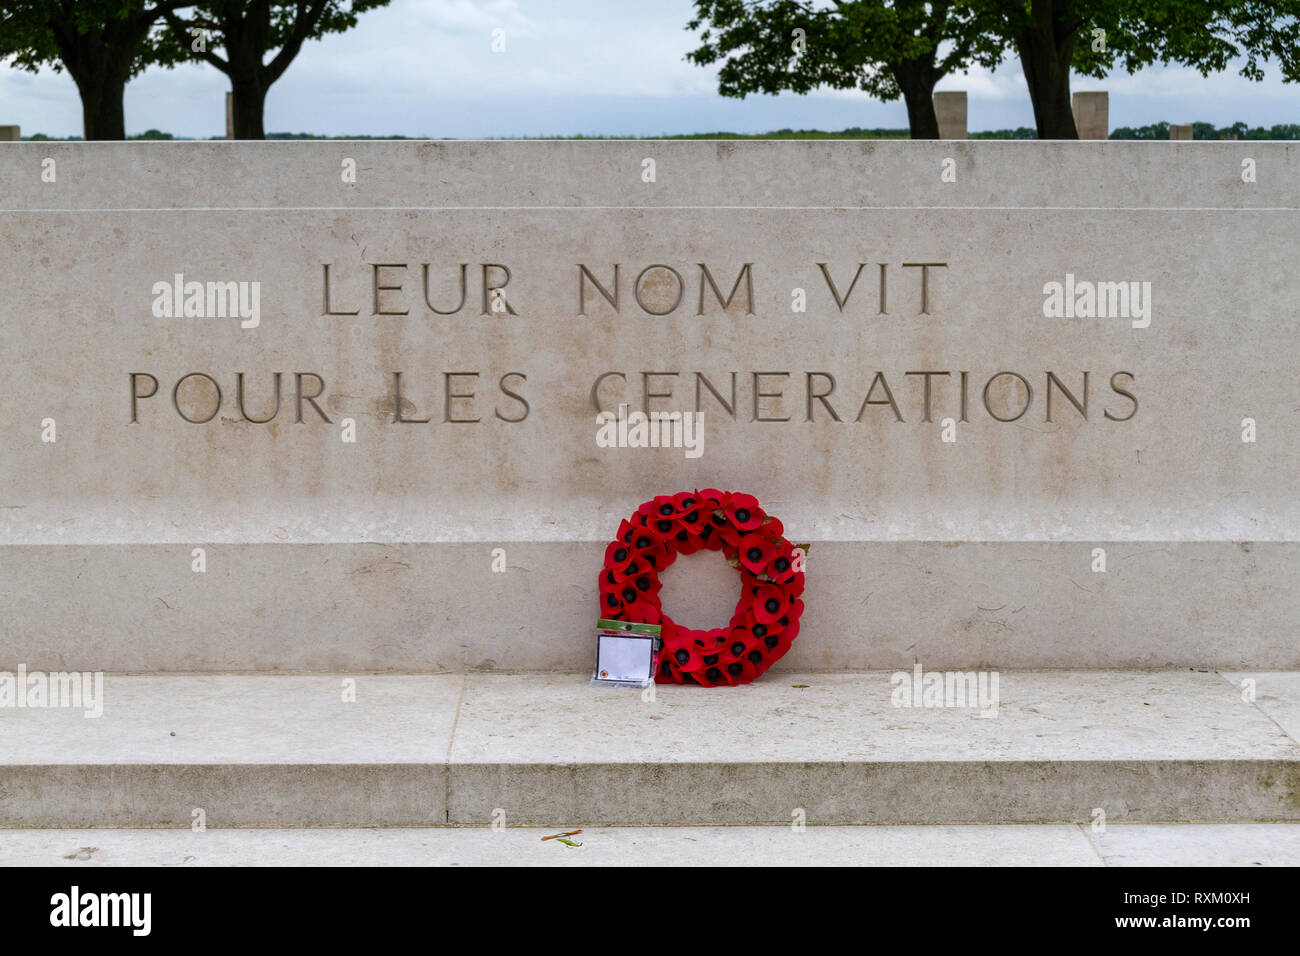 Remembrance Stone (with French inscription Leur Nom Vit Pour Les Generations), Beny-Sur-Mer Canadian Commonwealth Cemetery, Normandy, France. Stock Photo